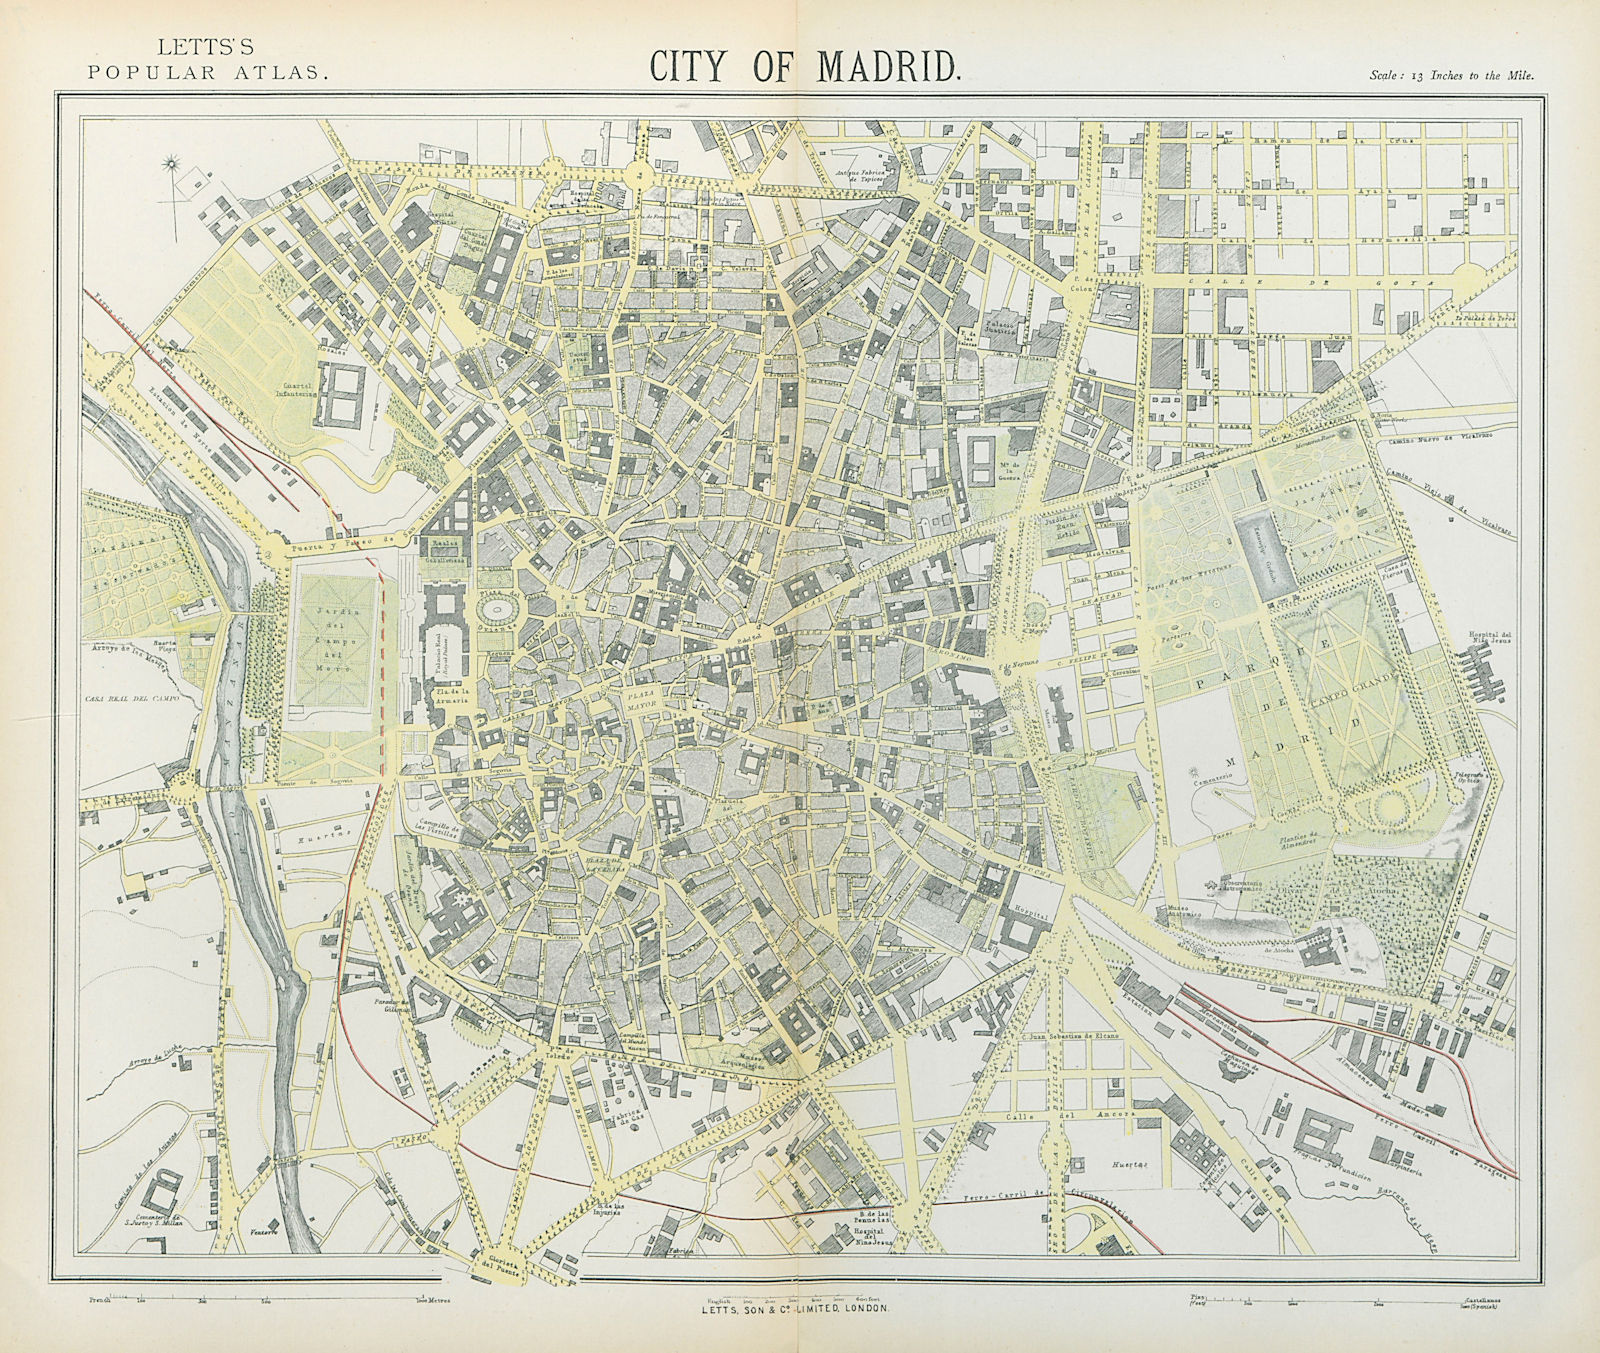 Associate Product MADRID antique town city map plan. Railways. LETTS 1883 old chart